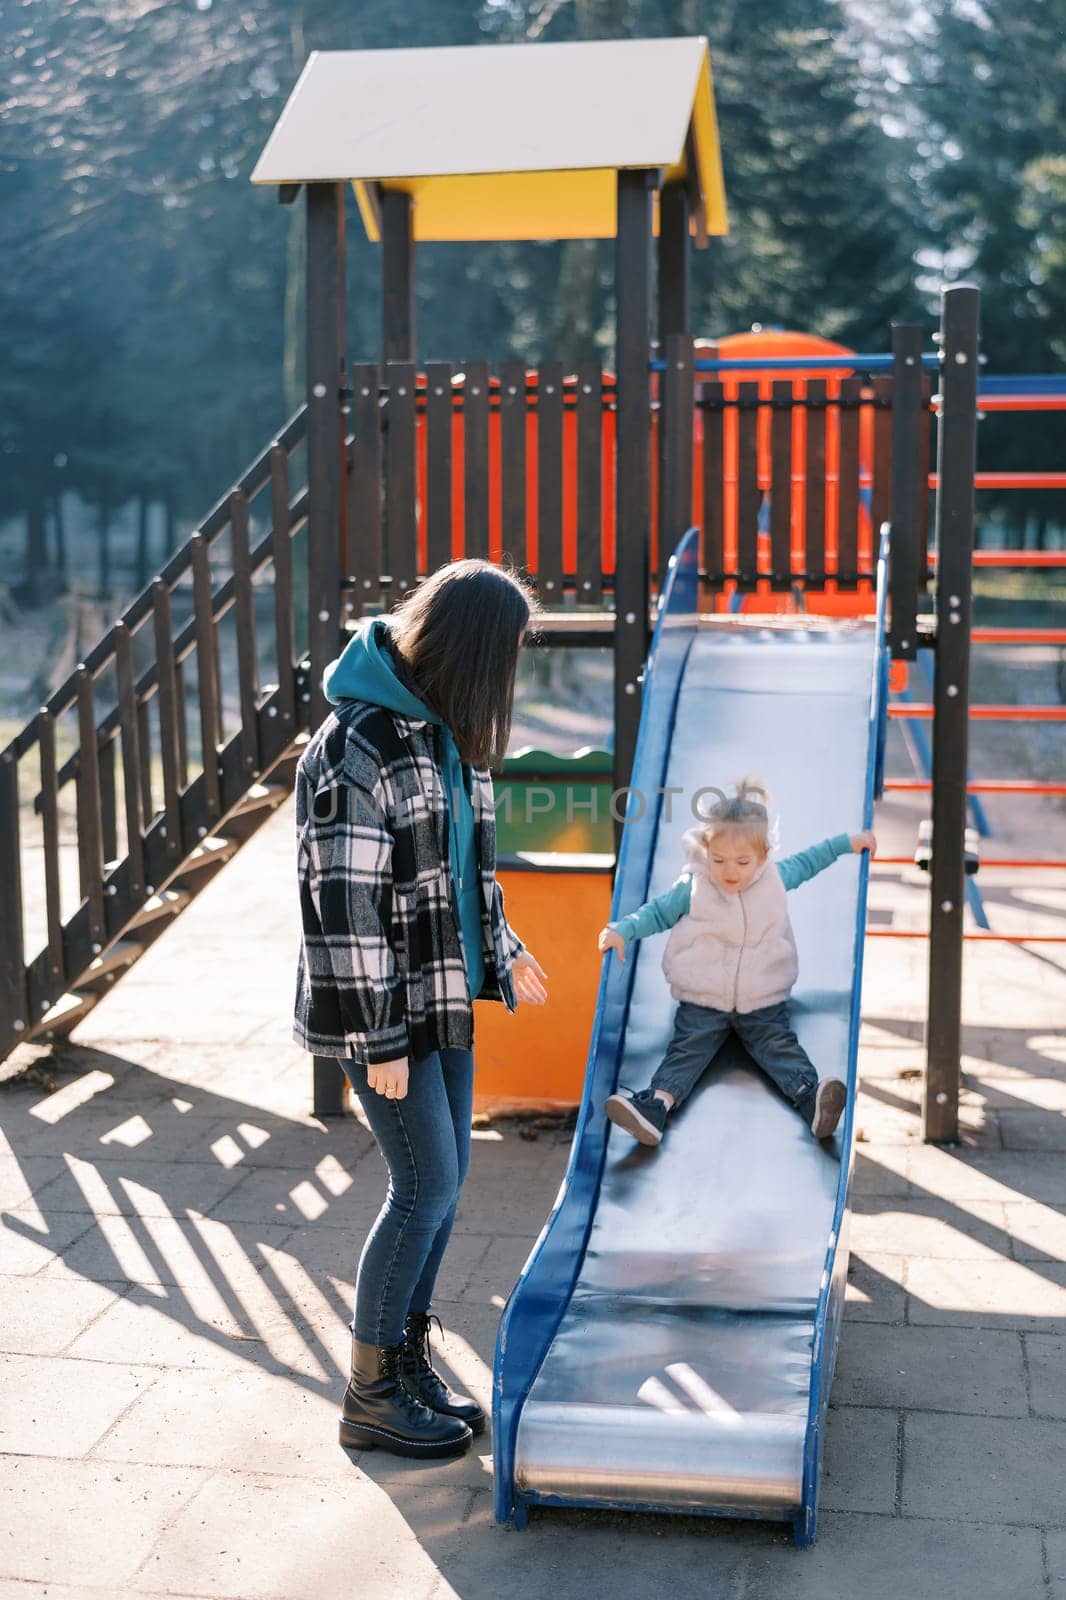 Little girl goes down the slide on the playground next to her standing mom. High quality photo